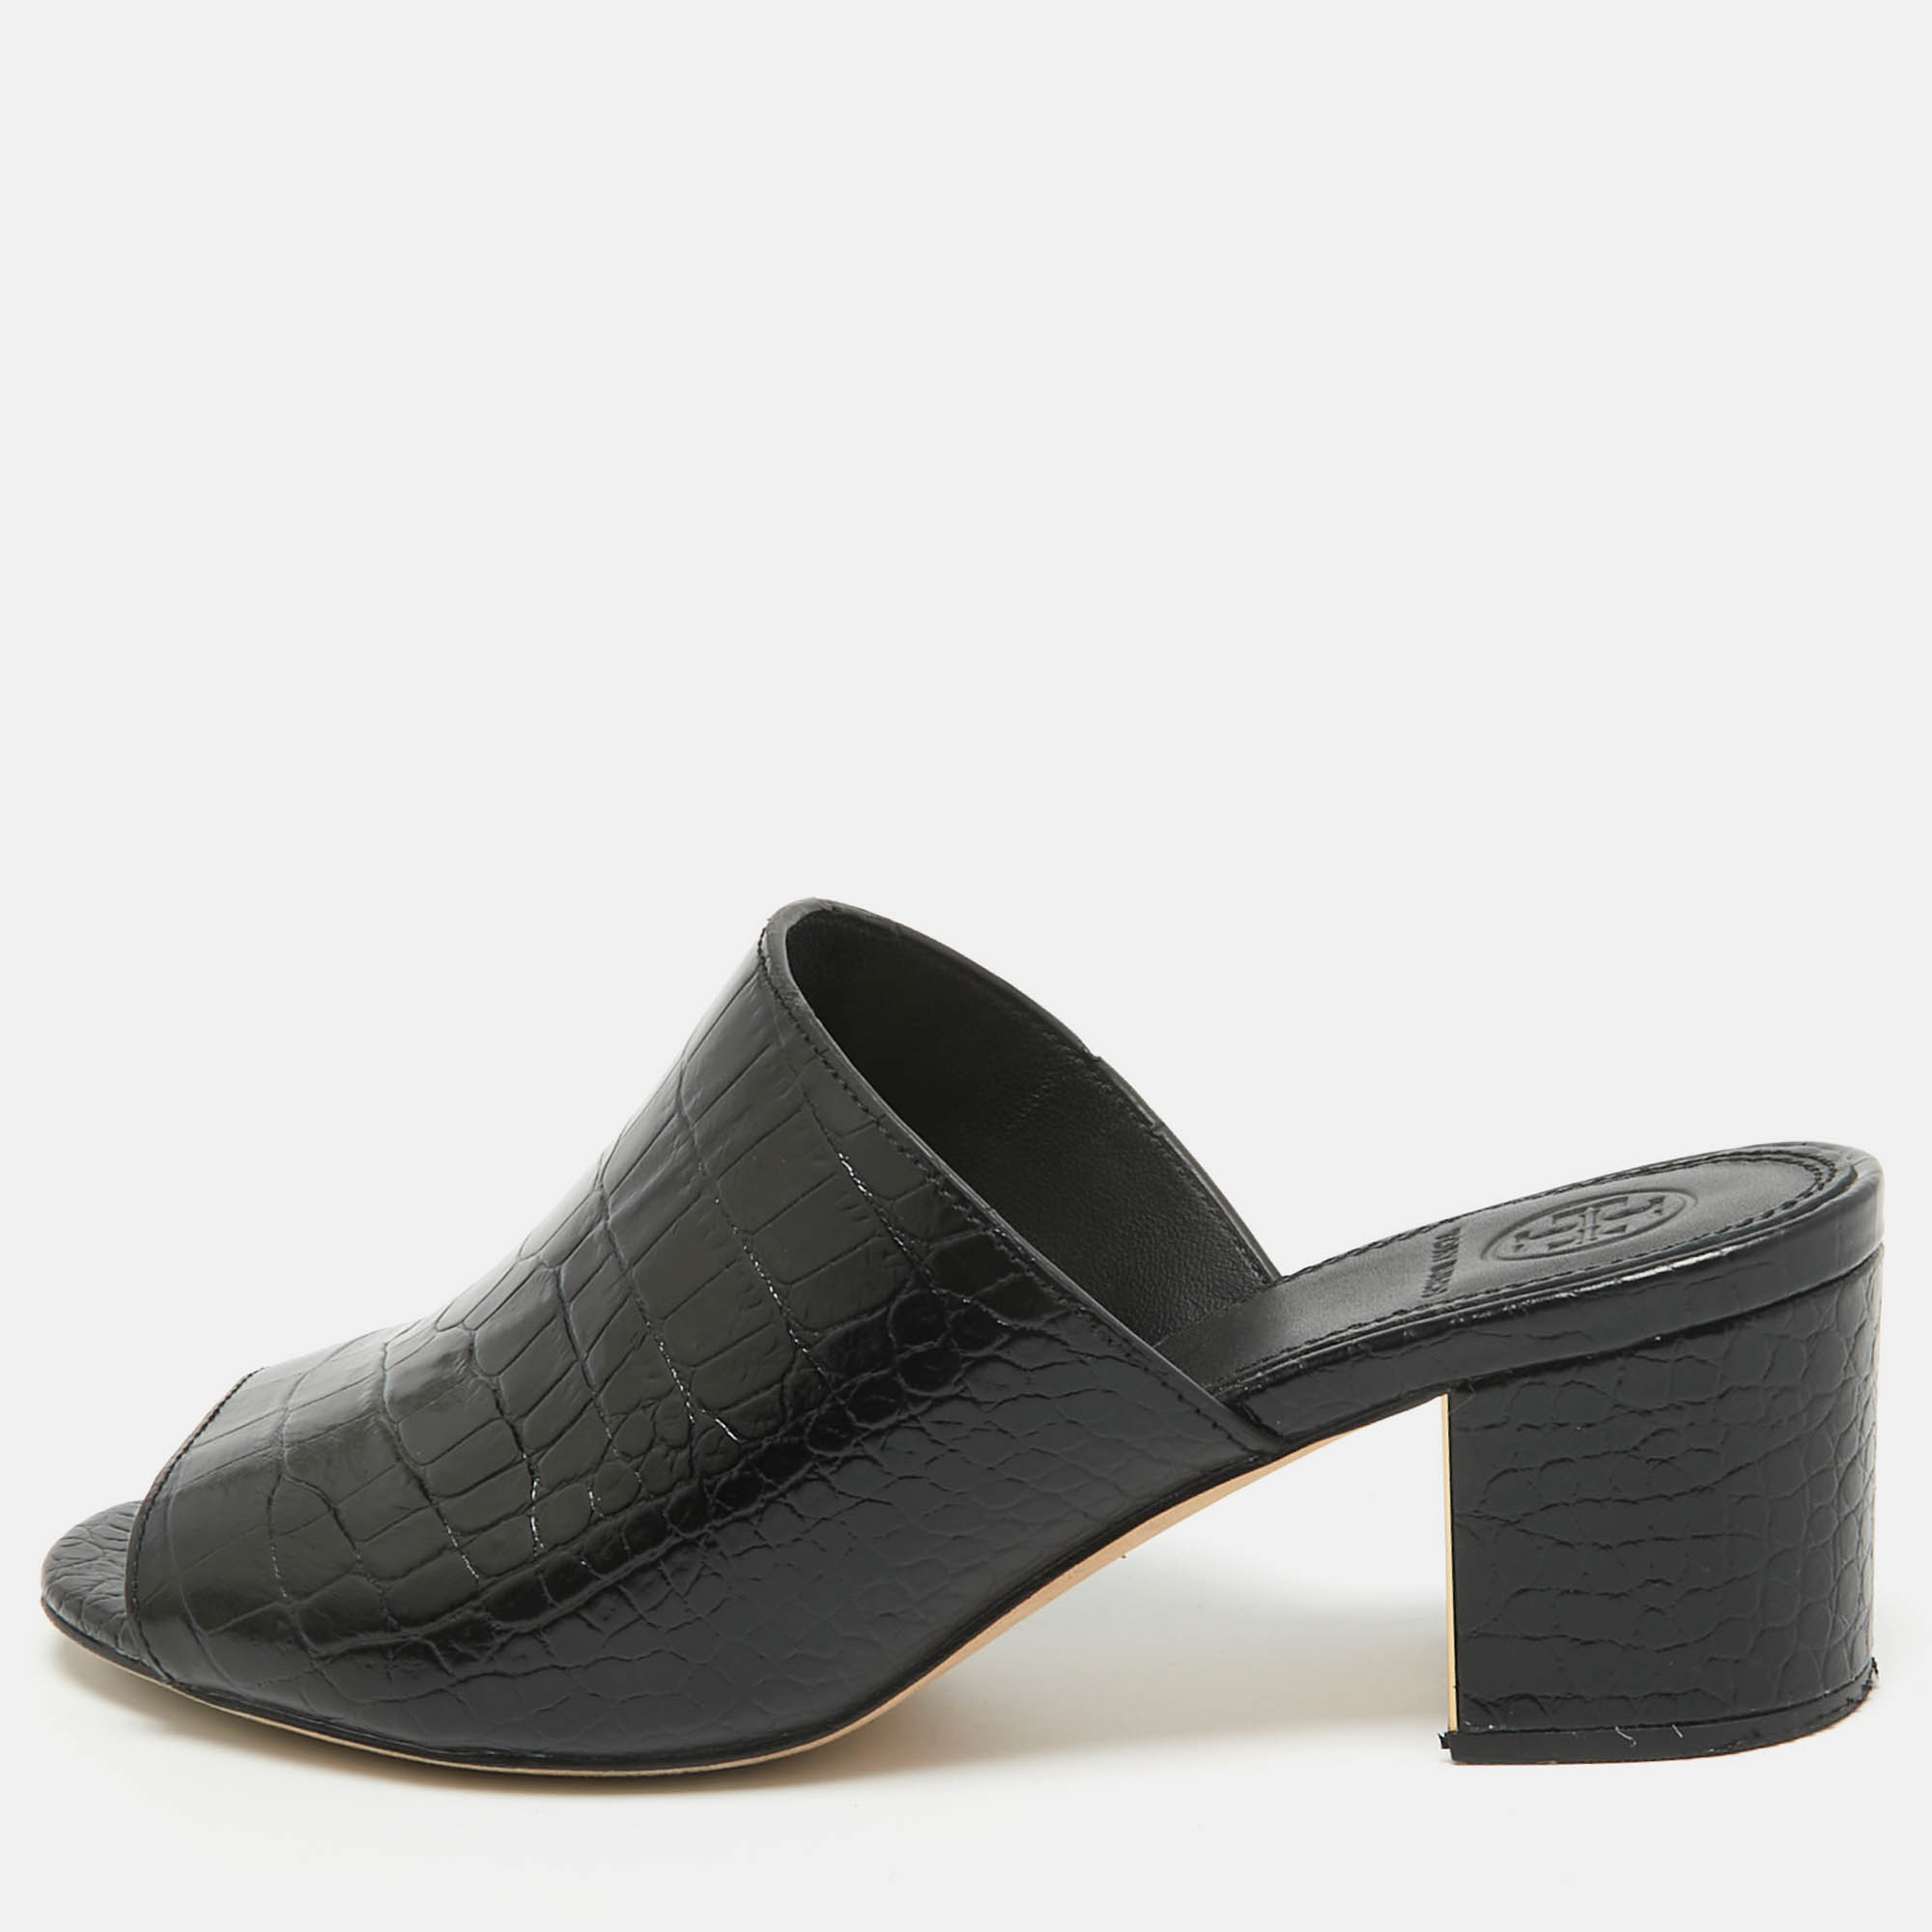 

Tory Burch Black Croc Embossed Leather Mules Size 36.5